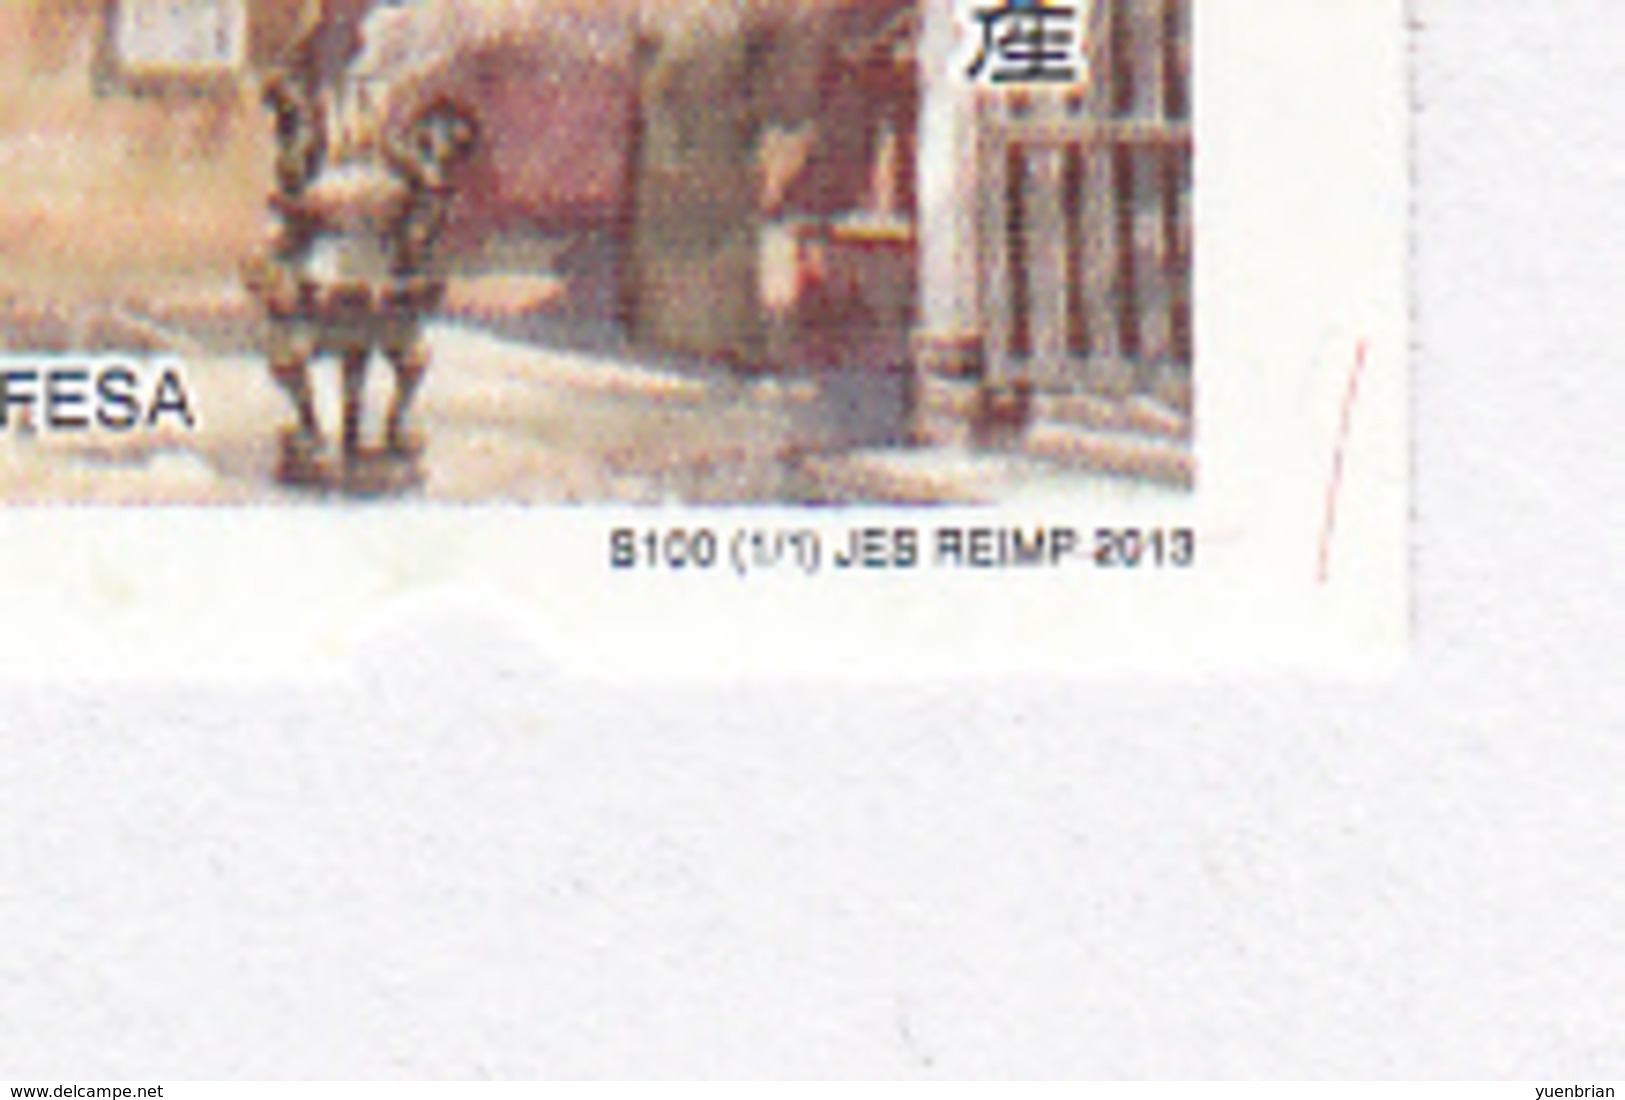 Macau, Macao, 2013, World Heritage, ATM (Printed With Font B) On Cover Sent From Macau To Hong Kong, Good Condition. - Storia Postale